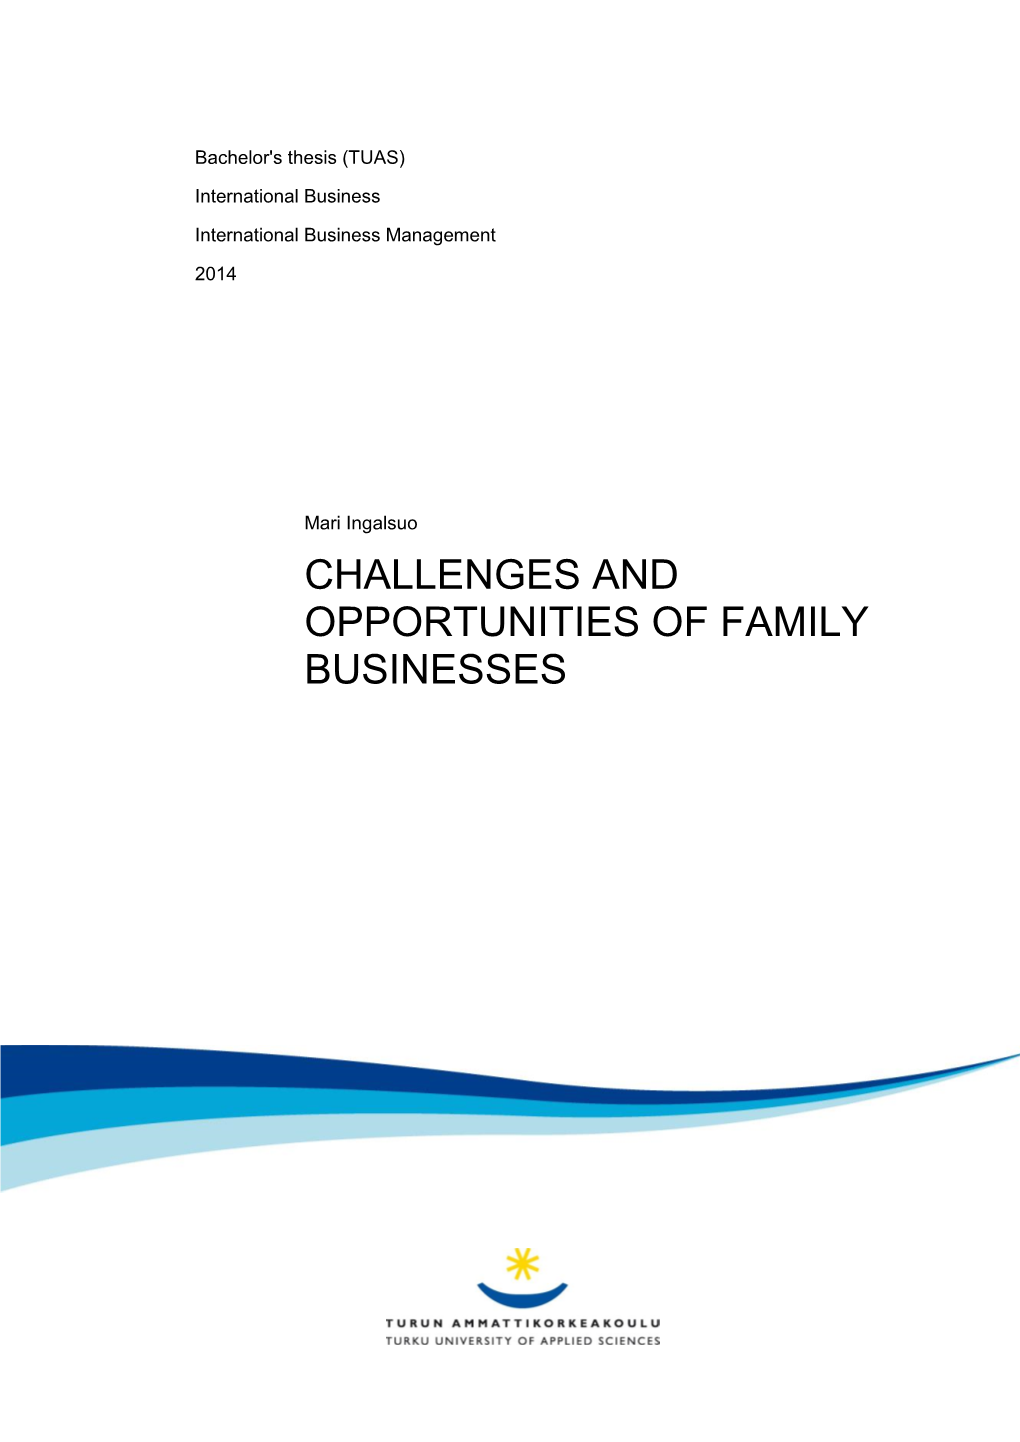 Challenges and Opportunities of Family Businesses